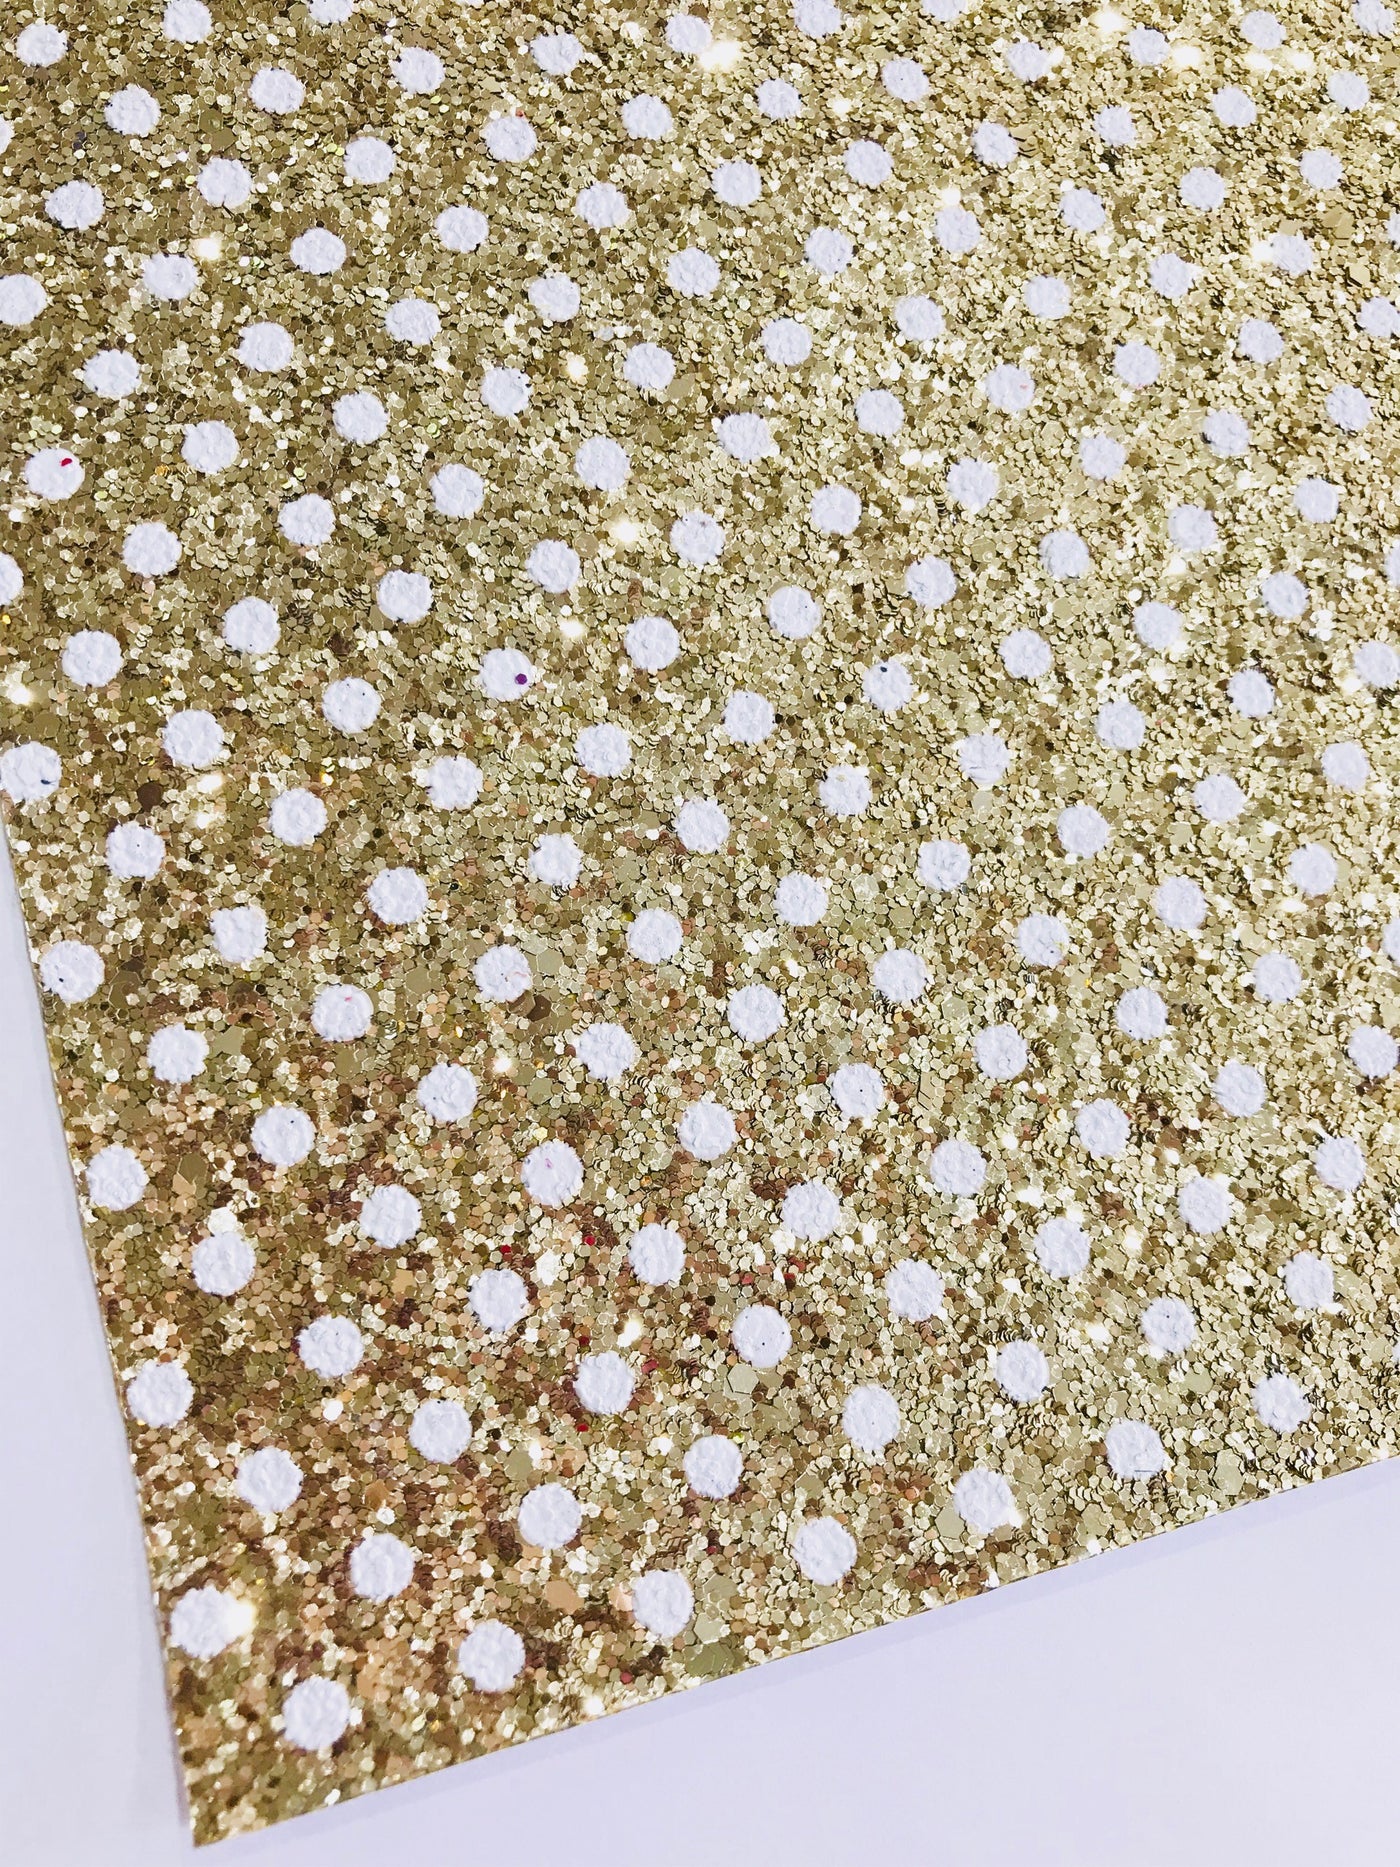 Gold Polka Dot Glitter with White Dot Fabric Sheet - Gold with White Spots